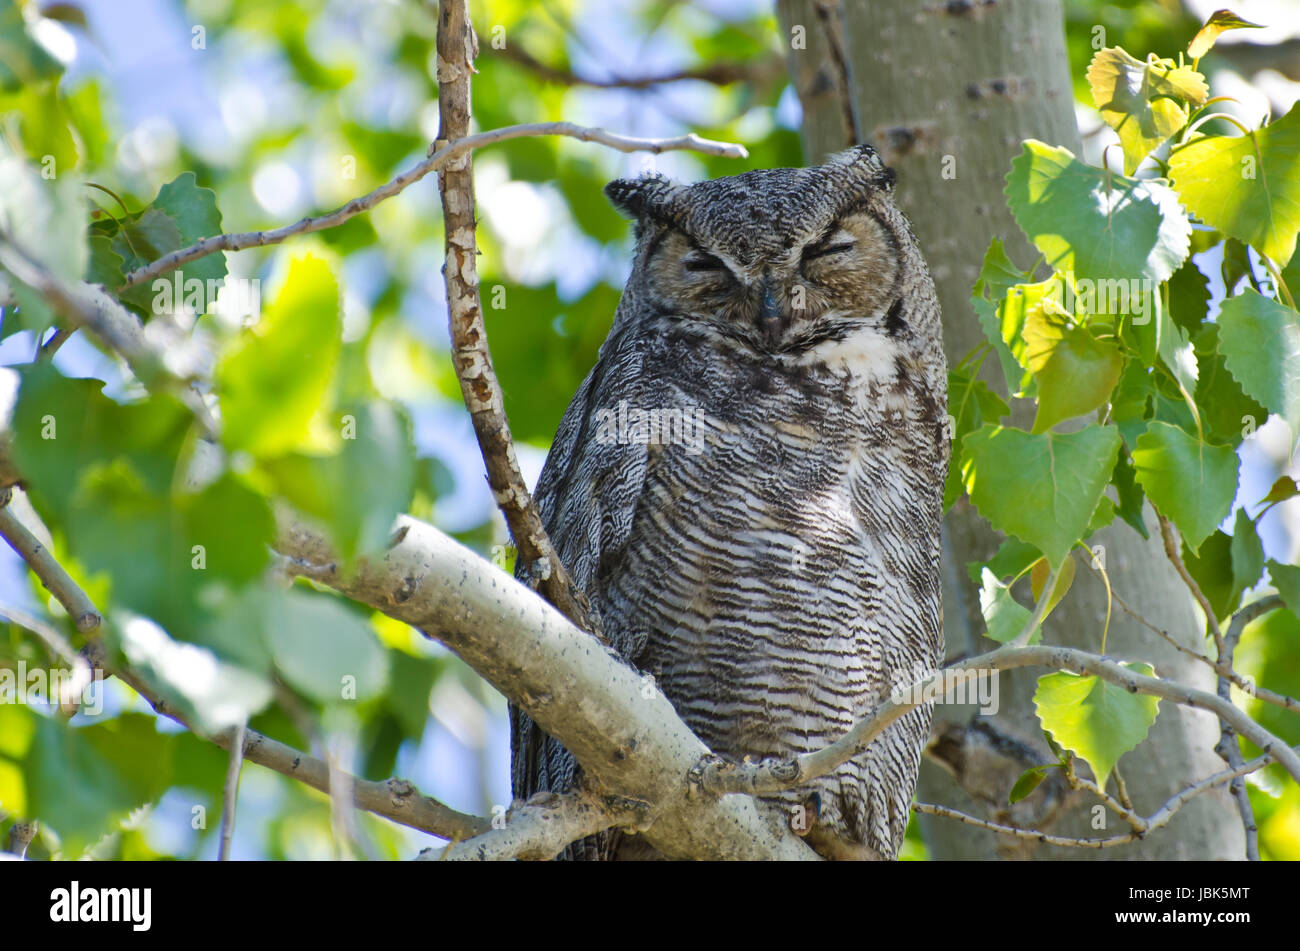 Great Horned Owl Perched on a Branch in a Tree Stock Photo